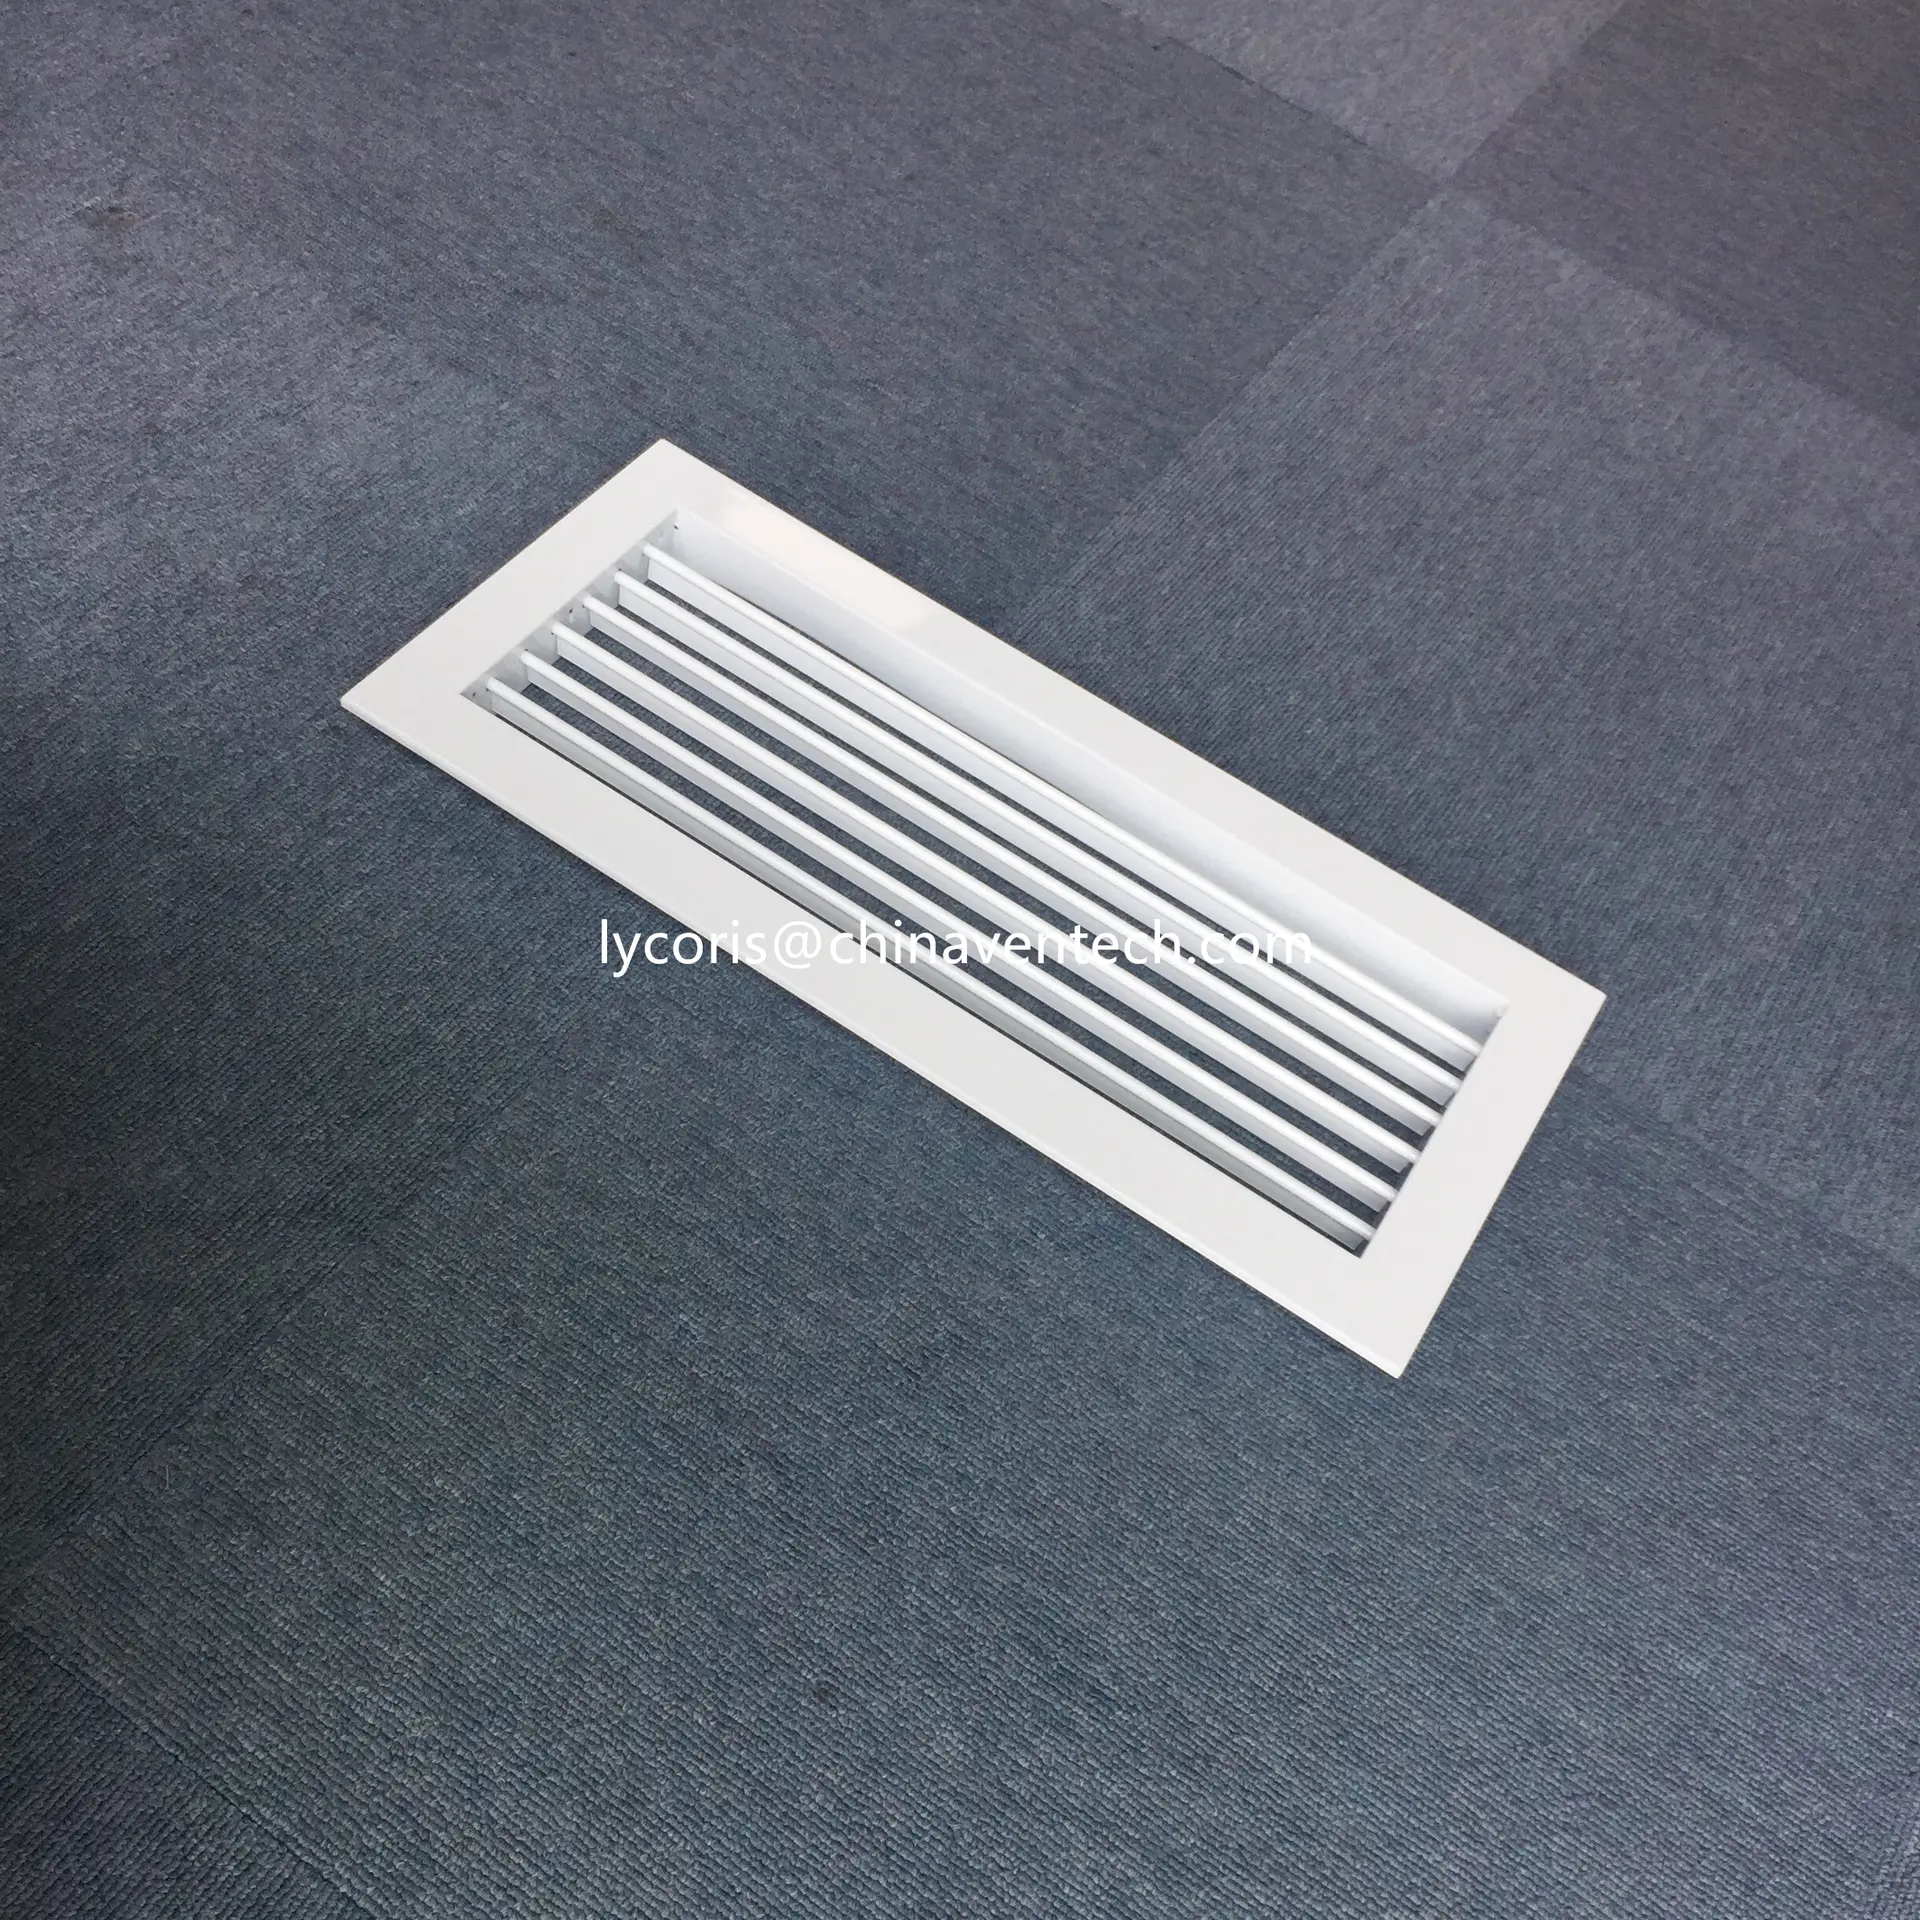 Ventech China air grille manufacturer sidewall return grille single deflection air grille